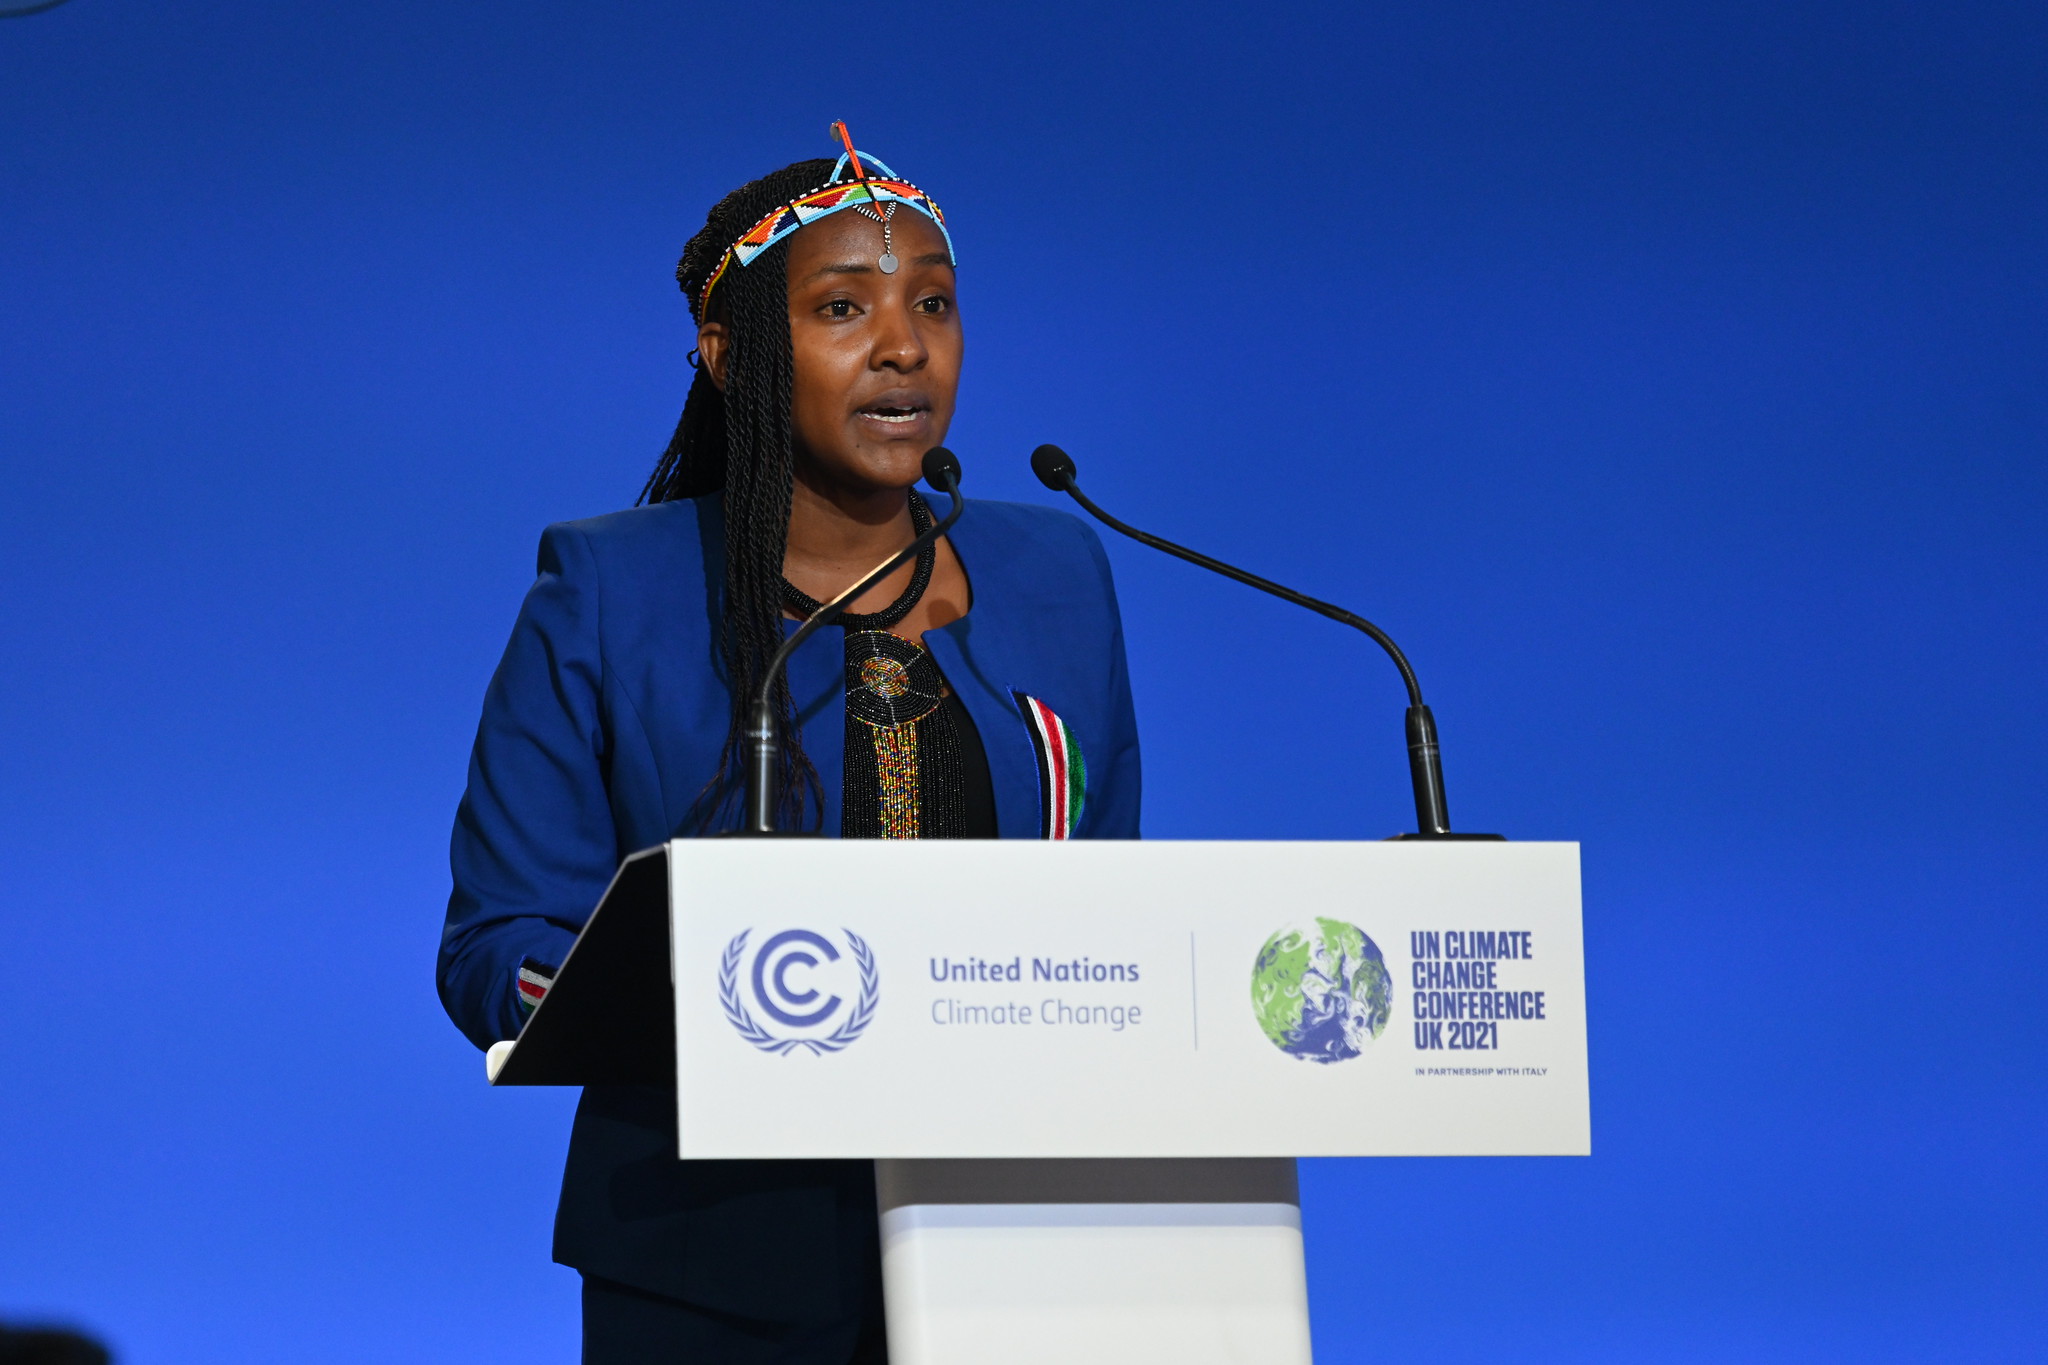 Elizabeth Wathuti speaks at the Opening Ceremony for COP26 at the SEC, Glasgow (Photograph: Karwai Tang/ UK Government) (2021). Image licensed under CC BY-NC-ND 2.0. Original location here.